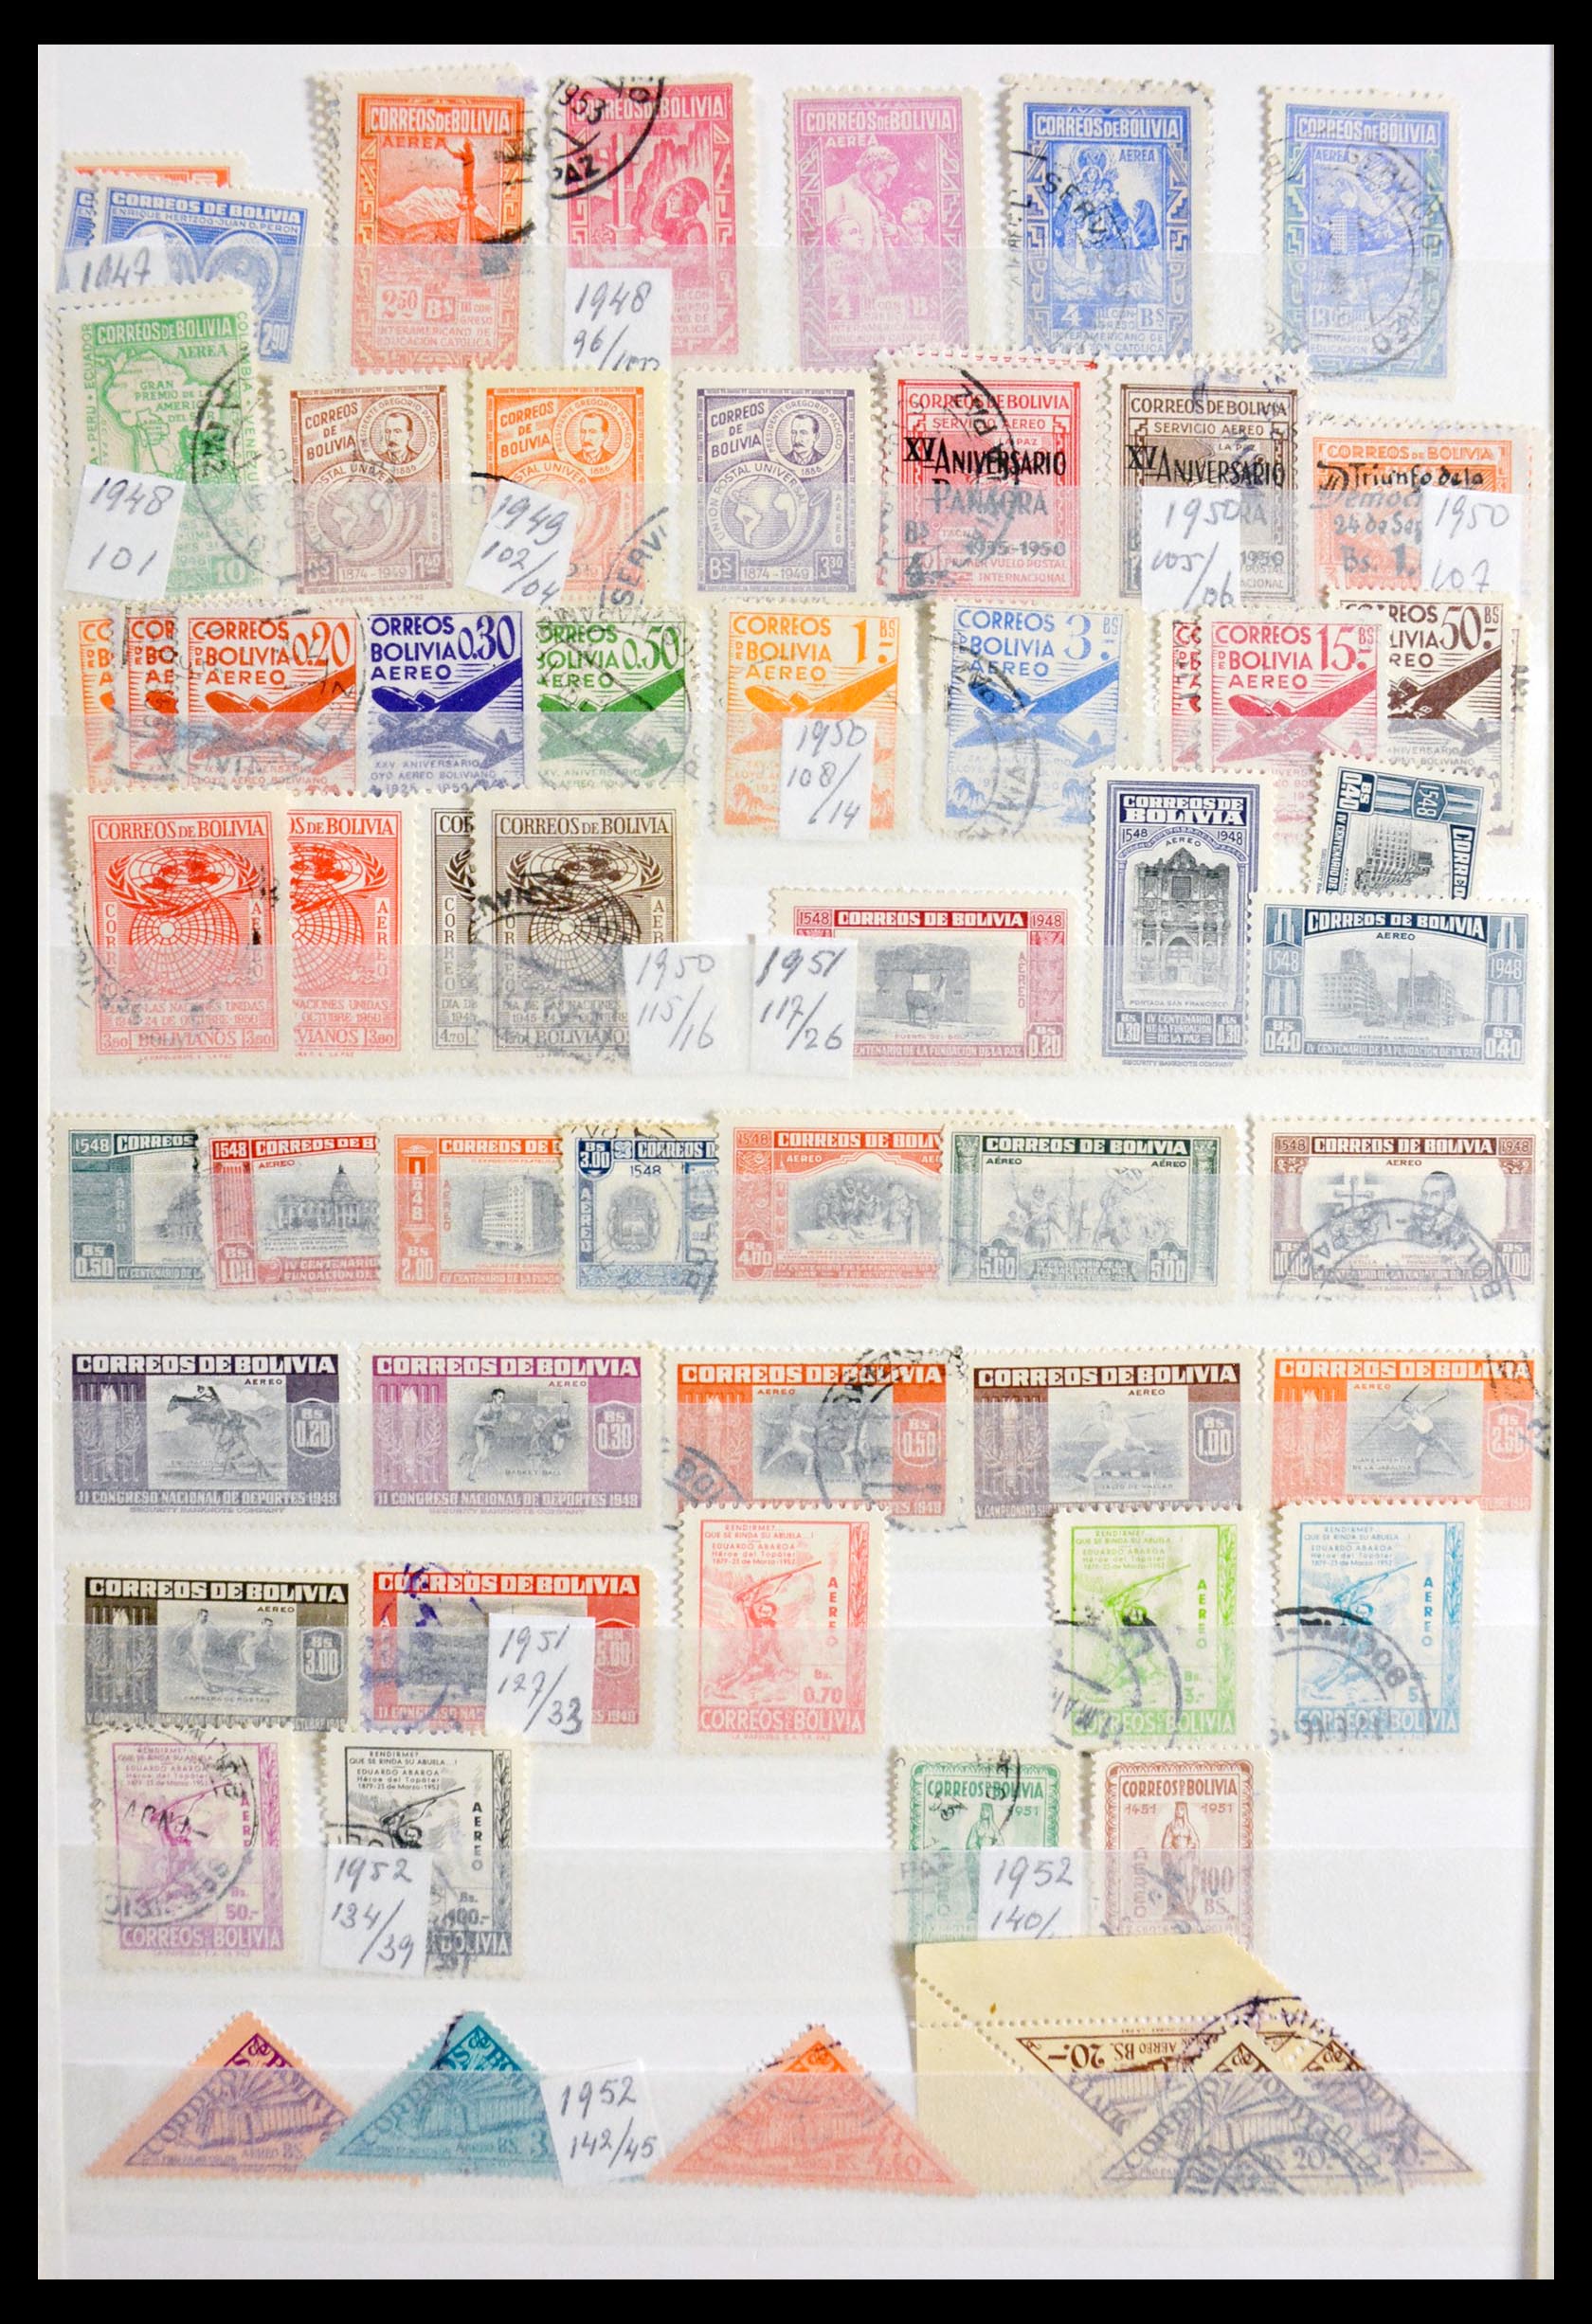 29917 018 - 29917 Latin America airmail stamps.